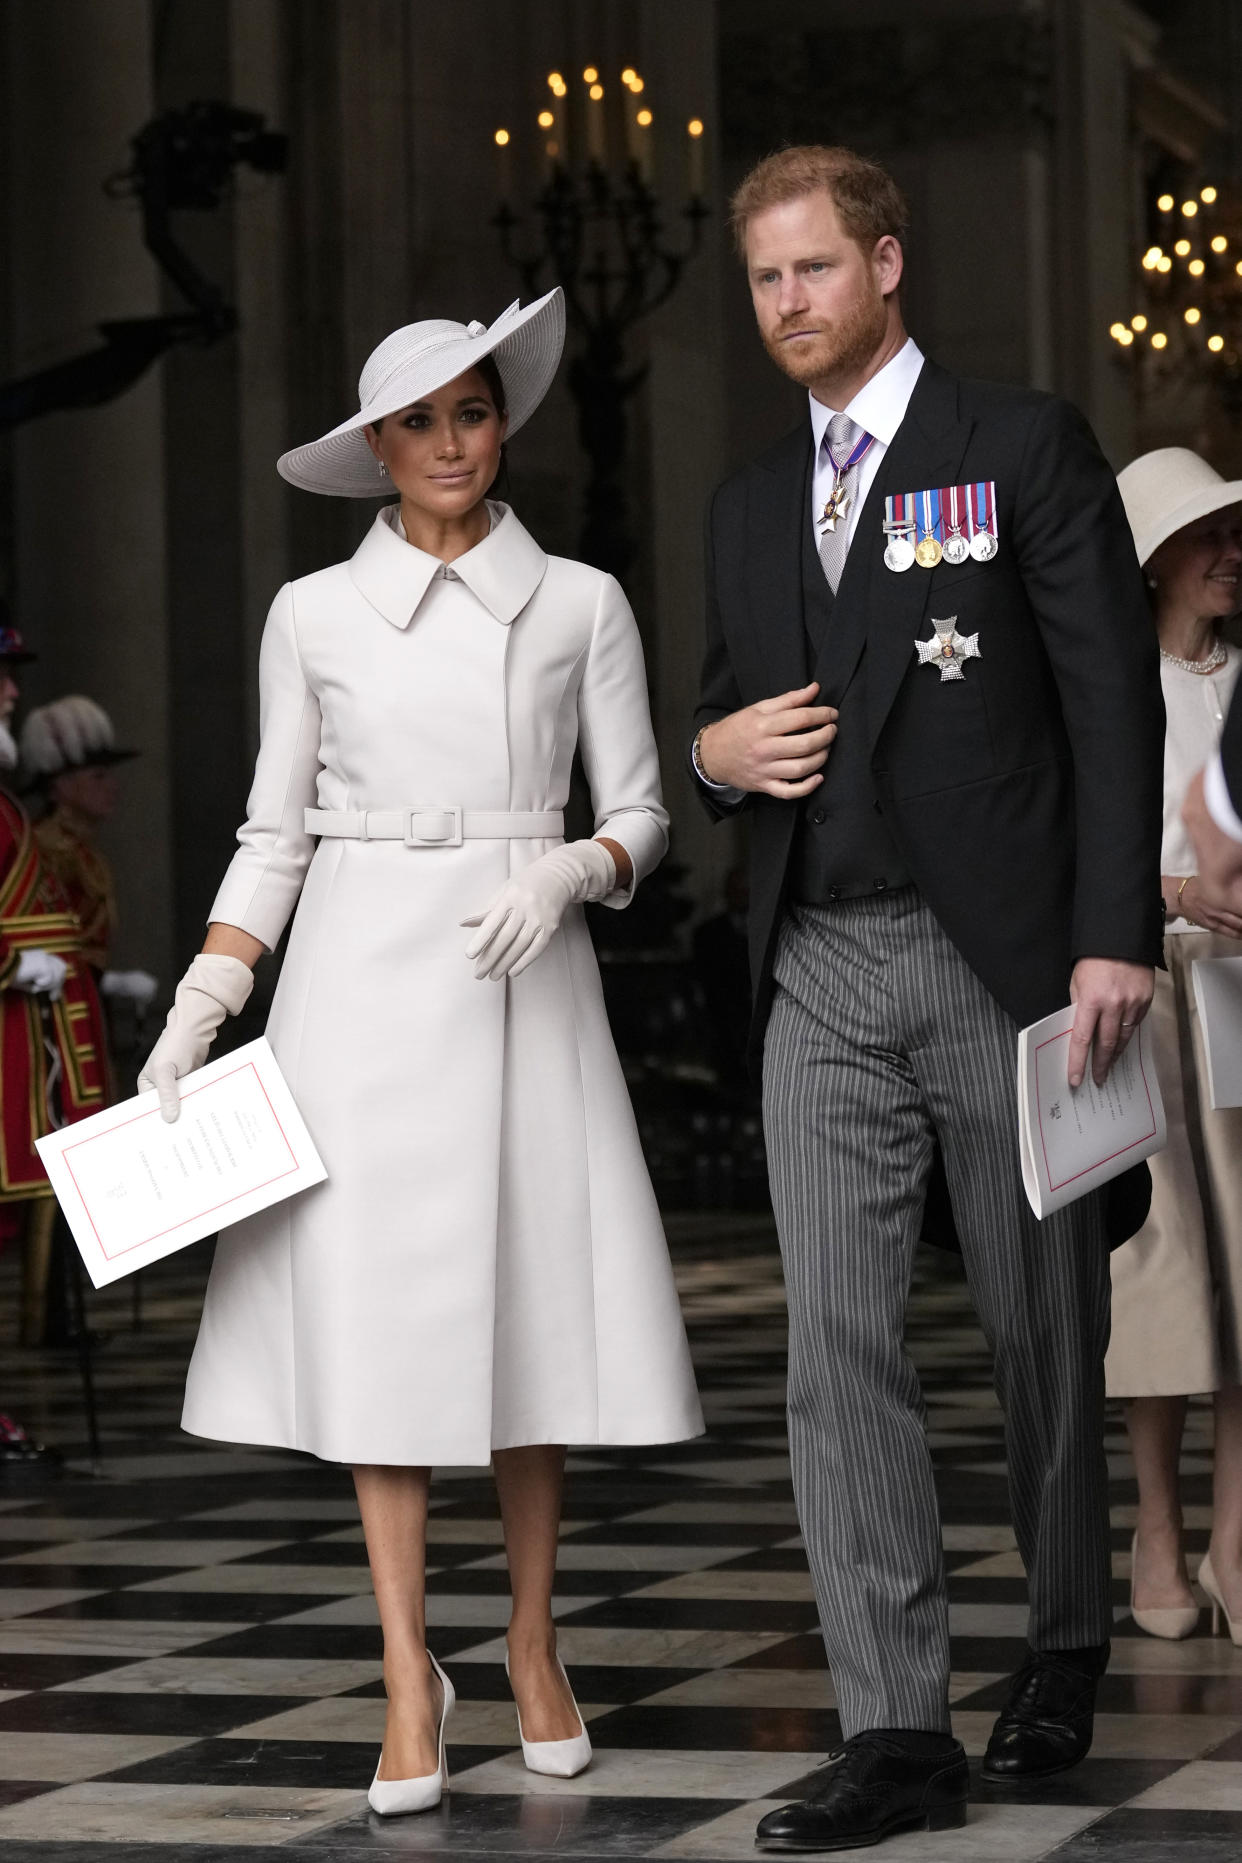  Duke and Duchess of Sussex at a service of thanksgiving in celebration of the Queen's Platinum Jubilee